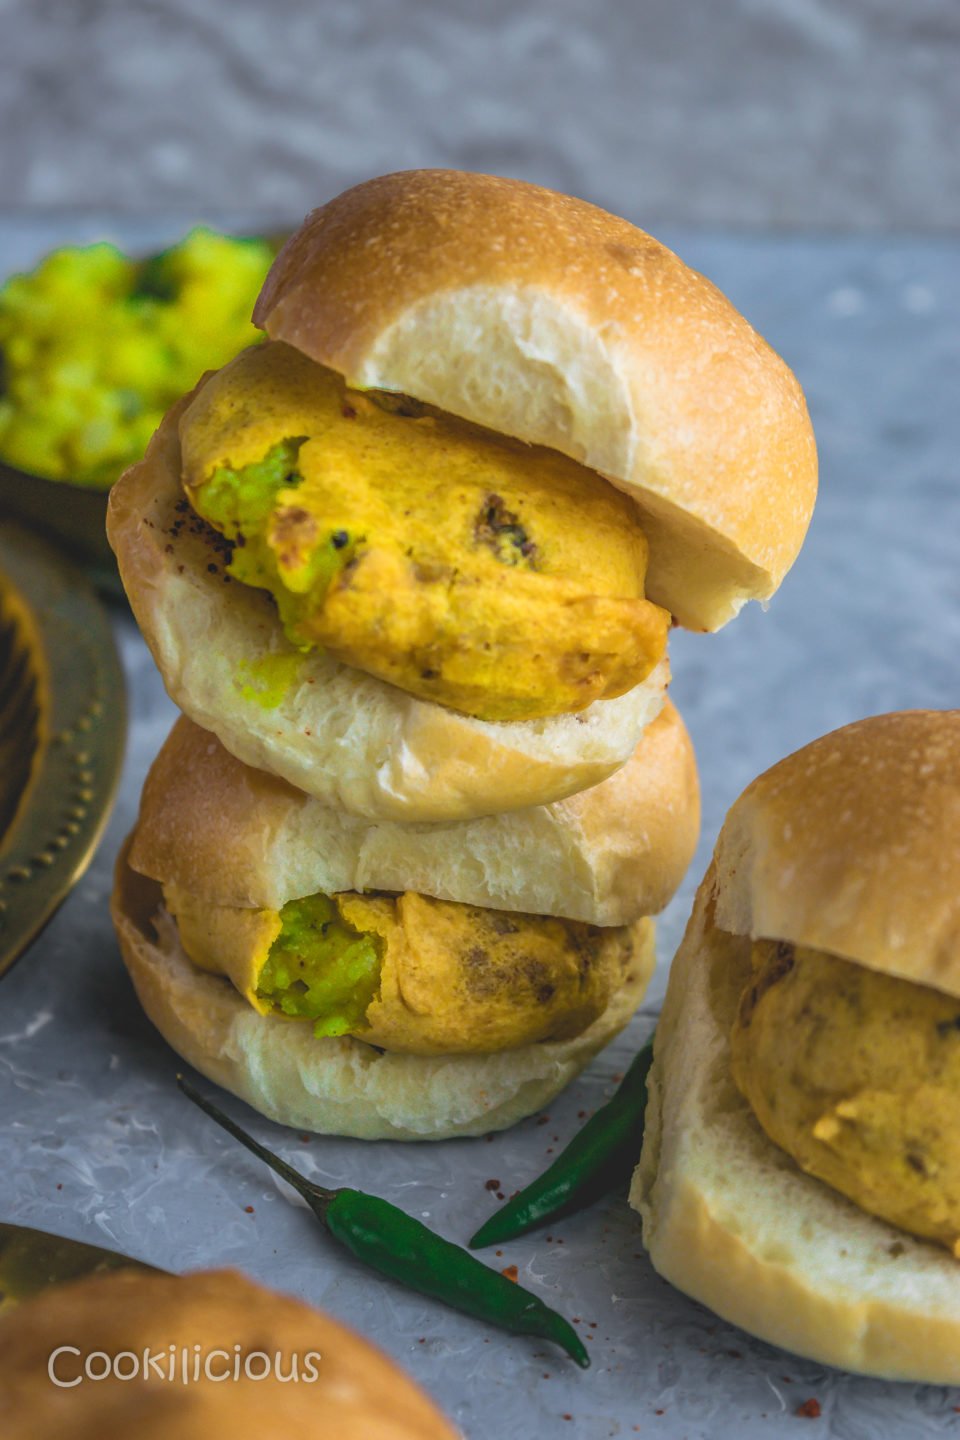 2 vada pav stacked one on top of the other